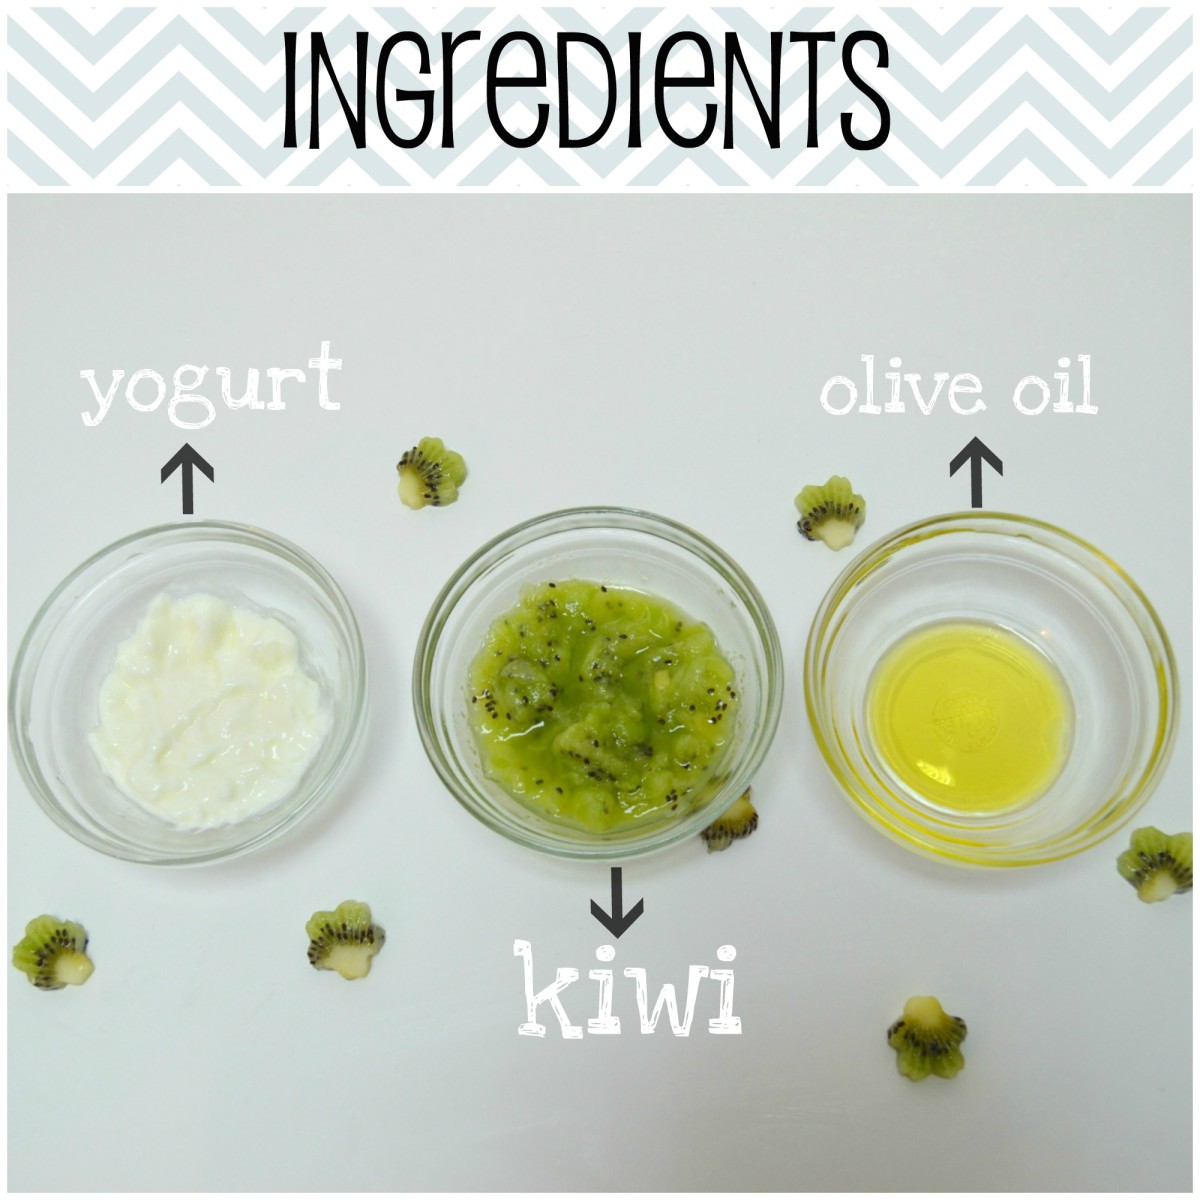 Only three ingredients are required for this kiwi face mask that will exfoliate, cleanse, and hydrate your skin!